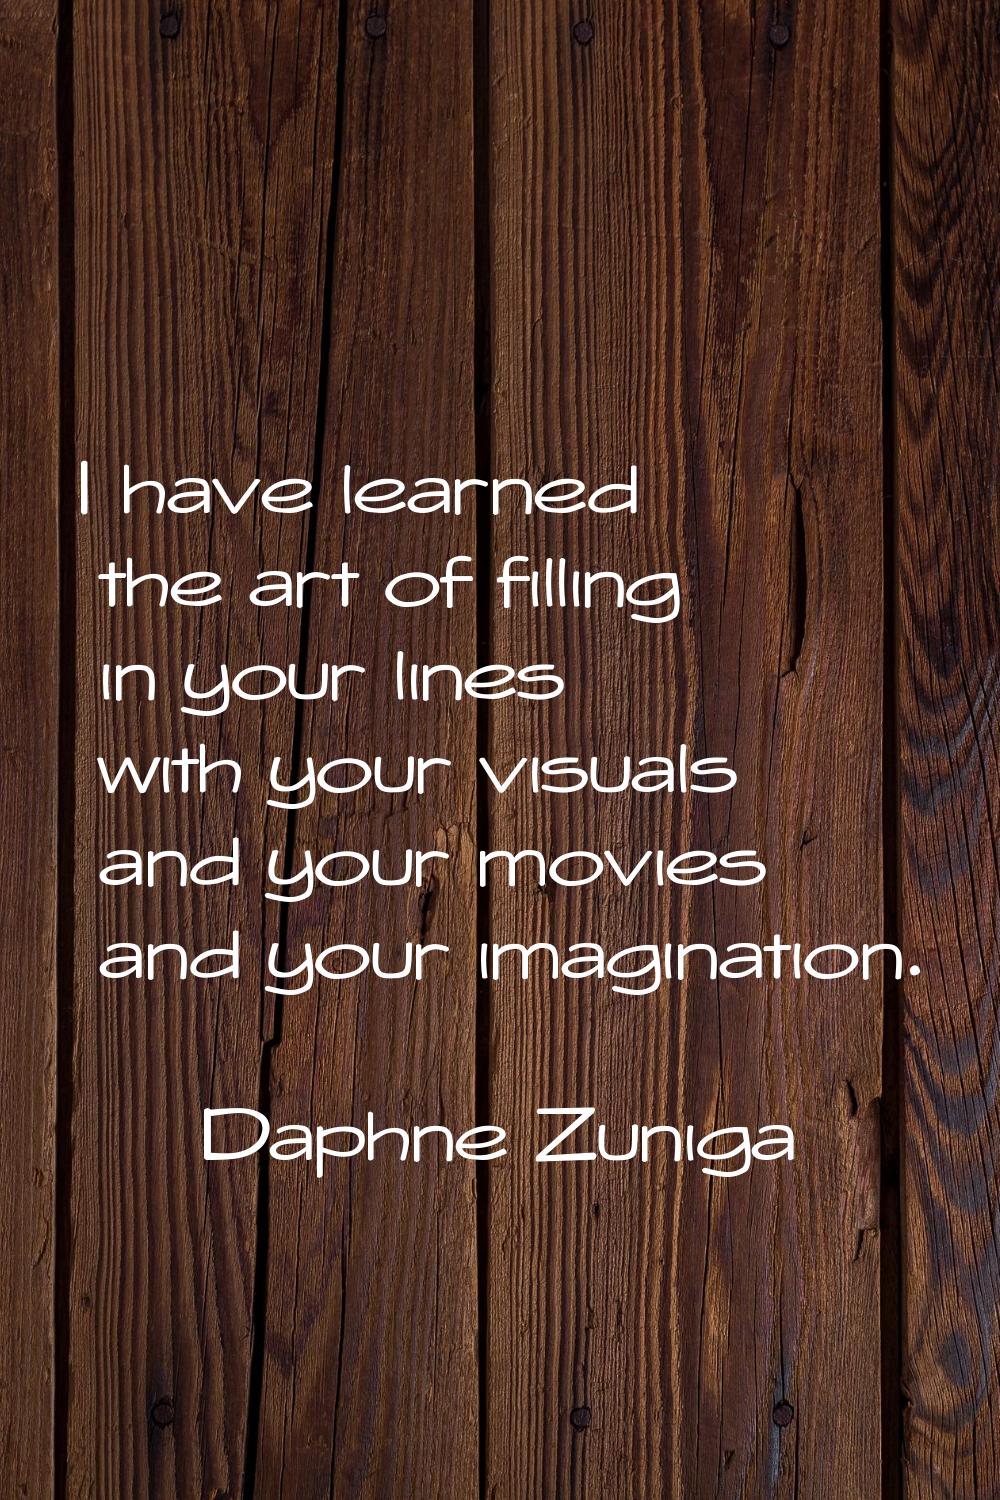 I have learned the art of filling in your lines with your visuals and your movies and your imaginat